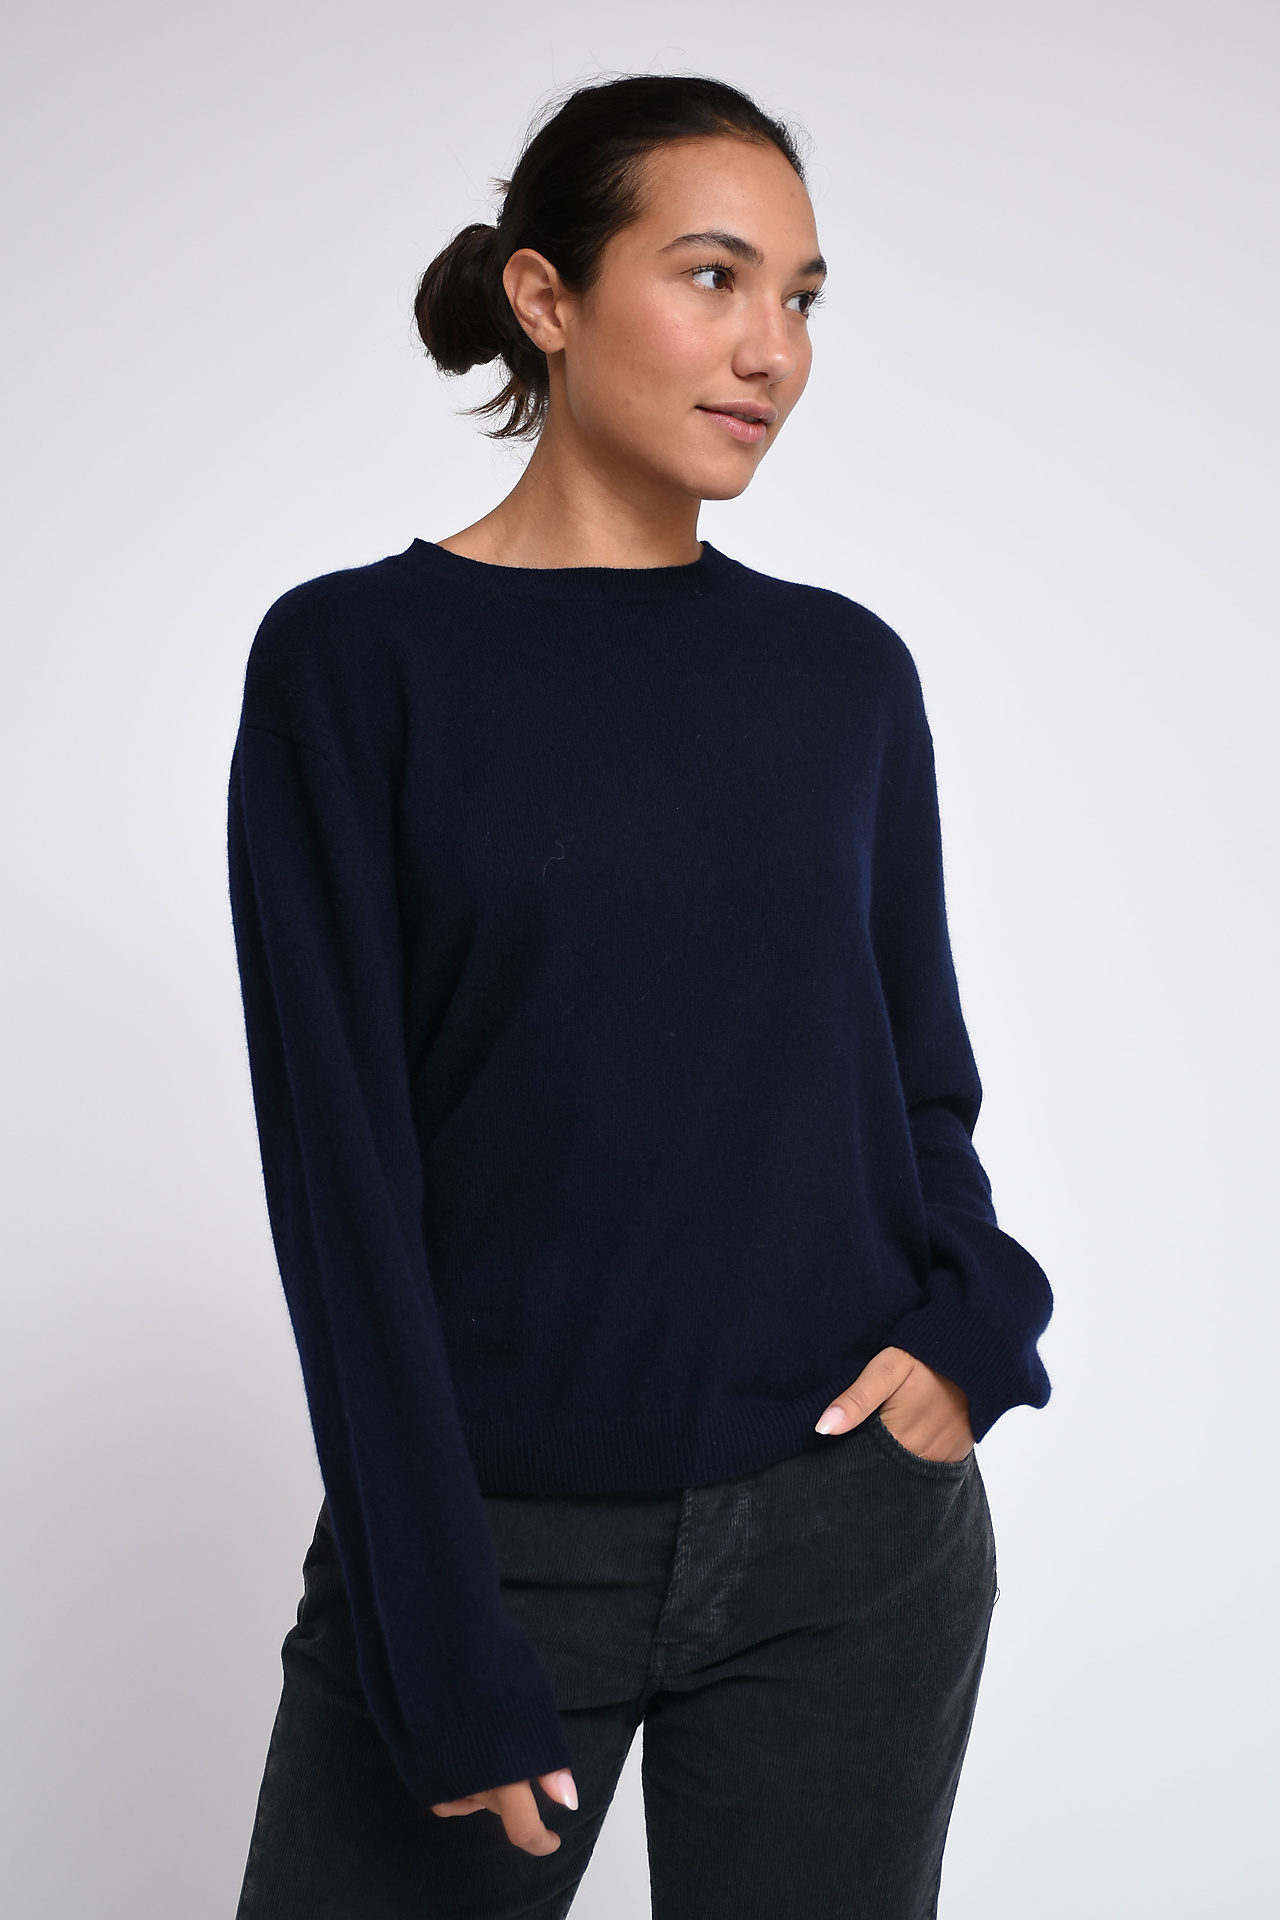 People's Republic of Cashmere Sweaters Blue